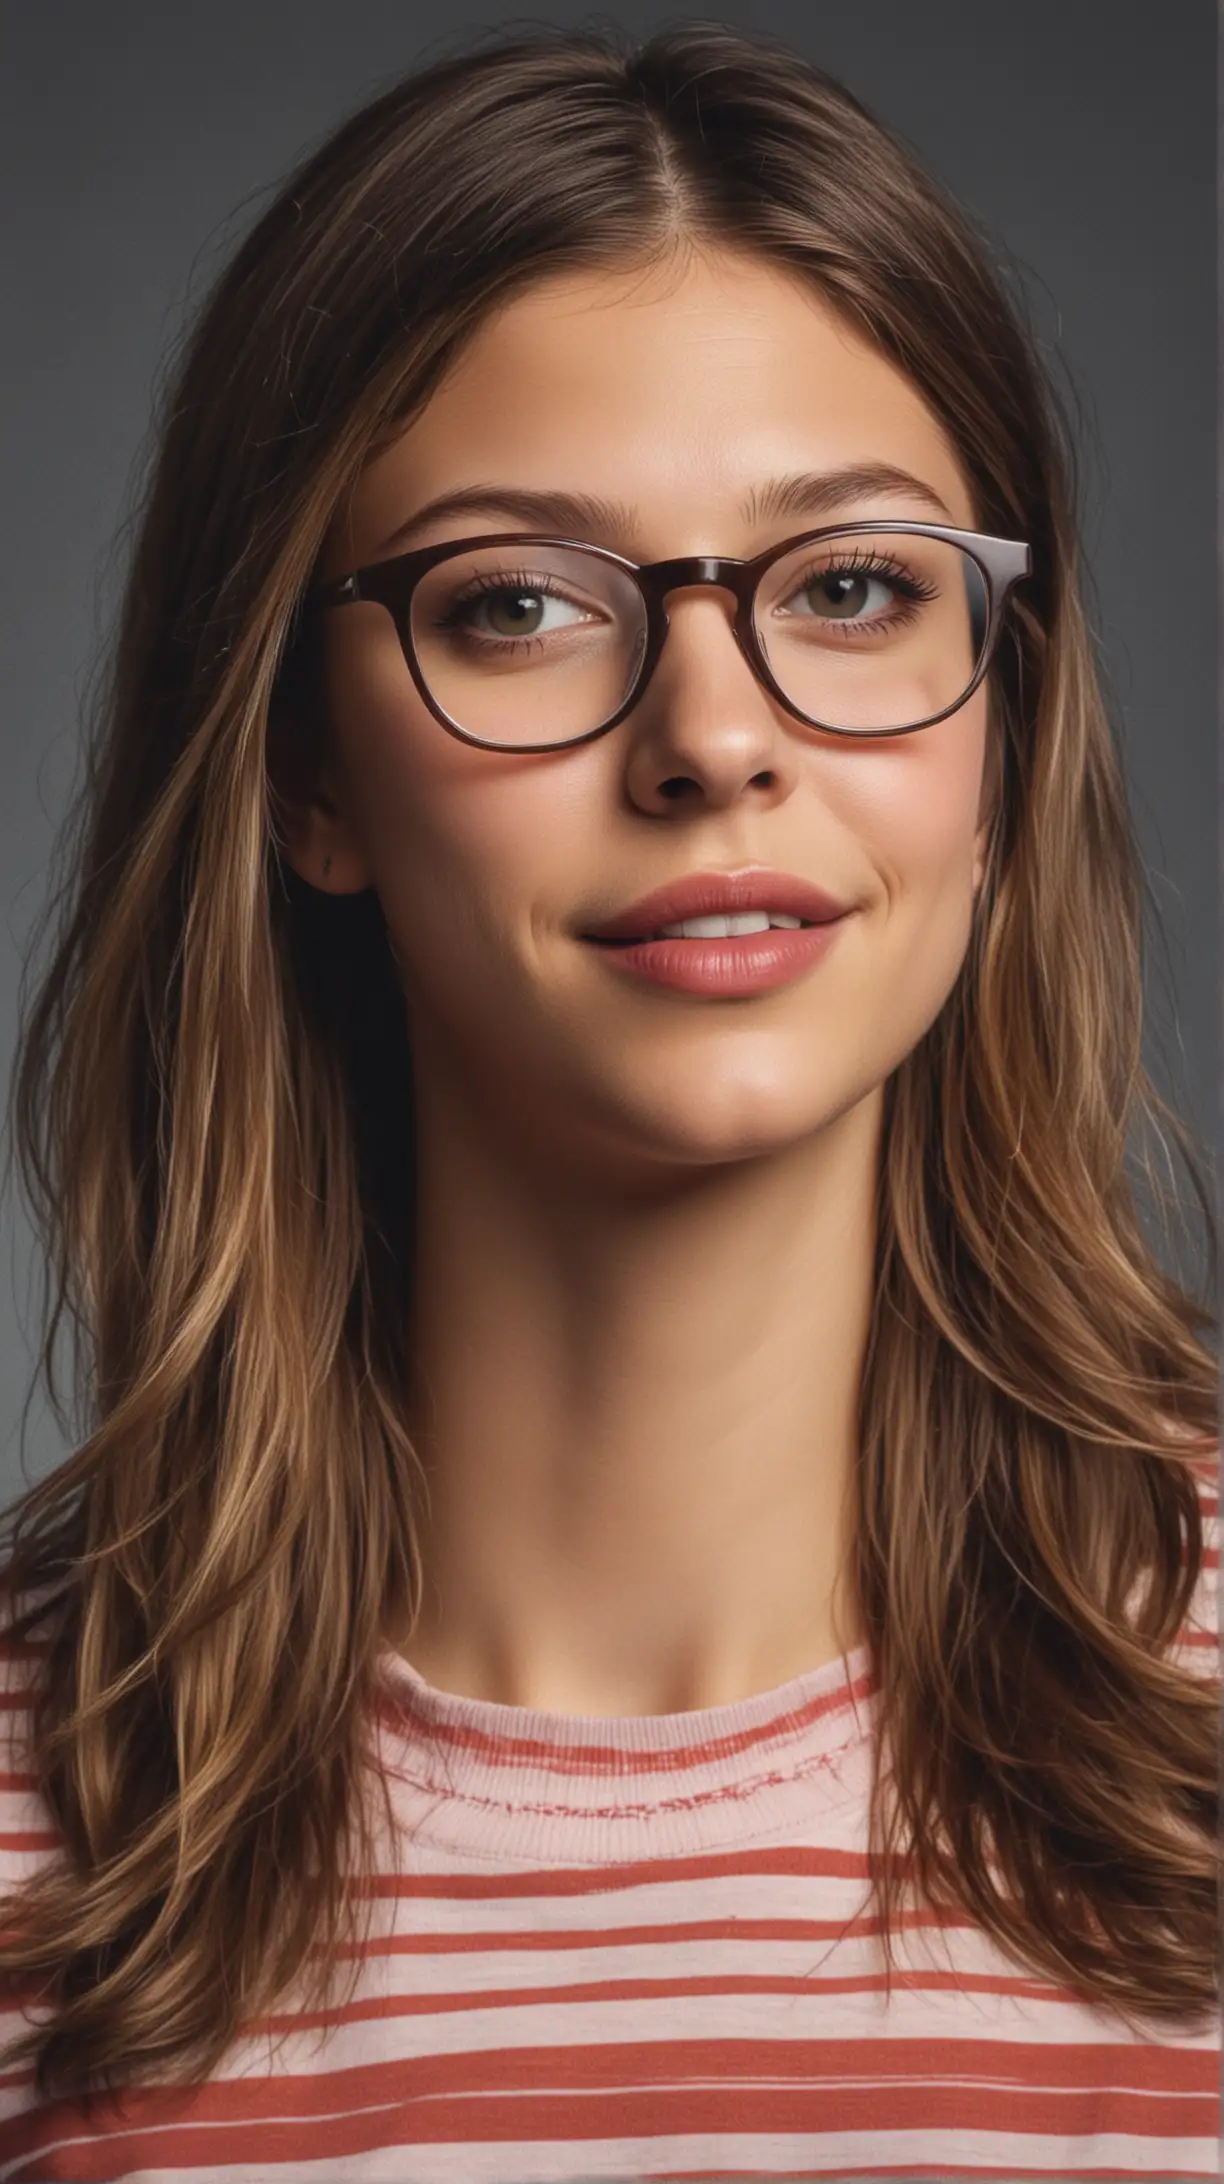 Retro Teen Fashion Melissa Benoist Channels 1980s Stranger Things Vibes with Glasses